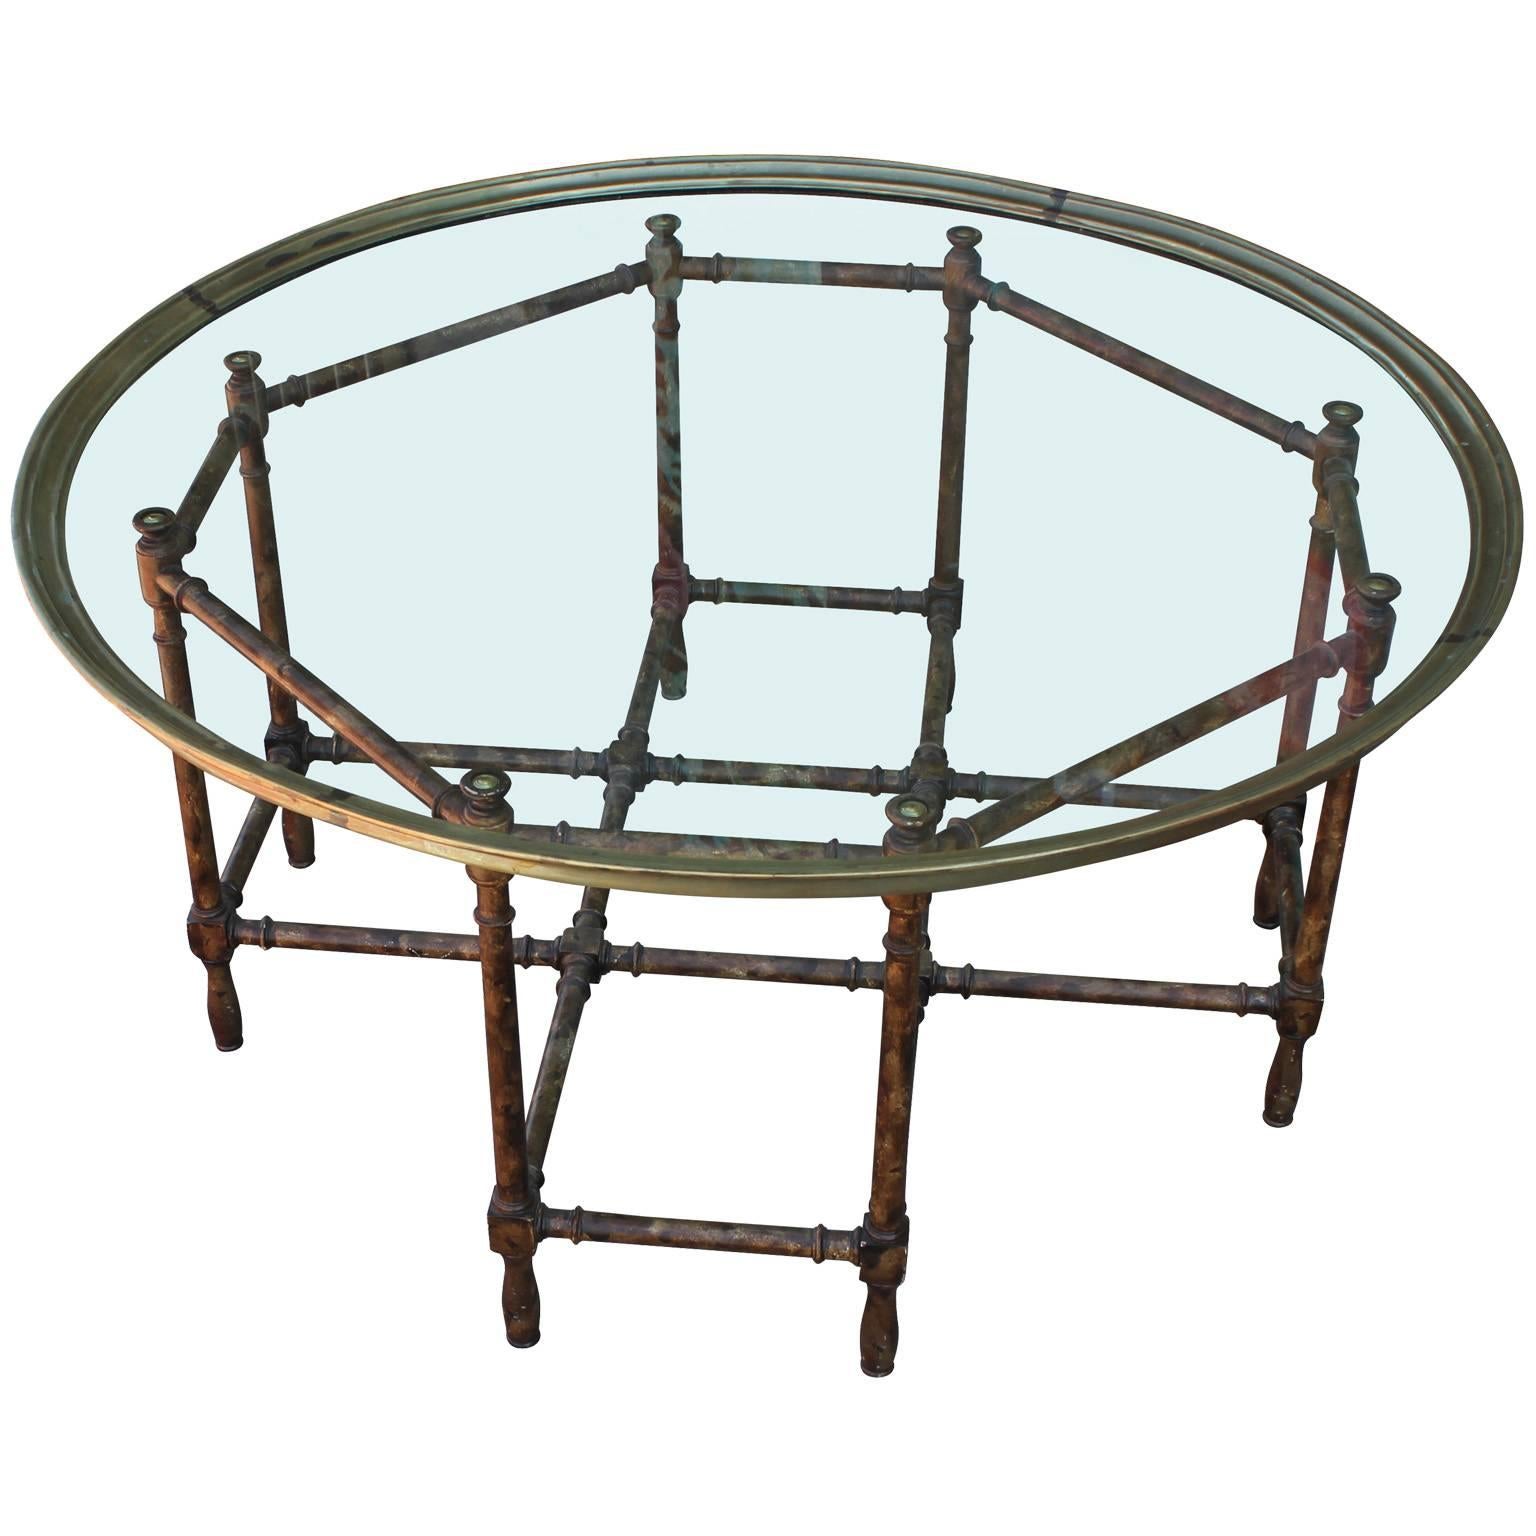 Mid-Century Modern Modern Faux Bamboo Glass Tray Topped Coffee Table by Baker with Brass Accents